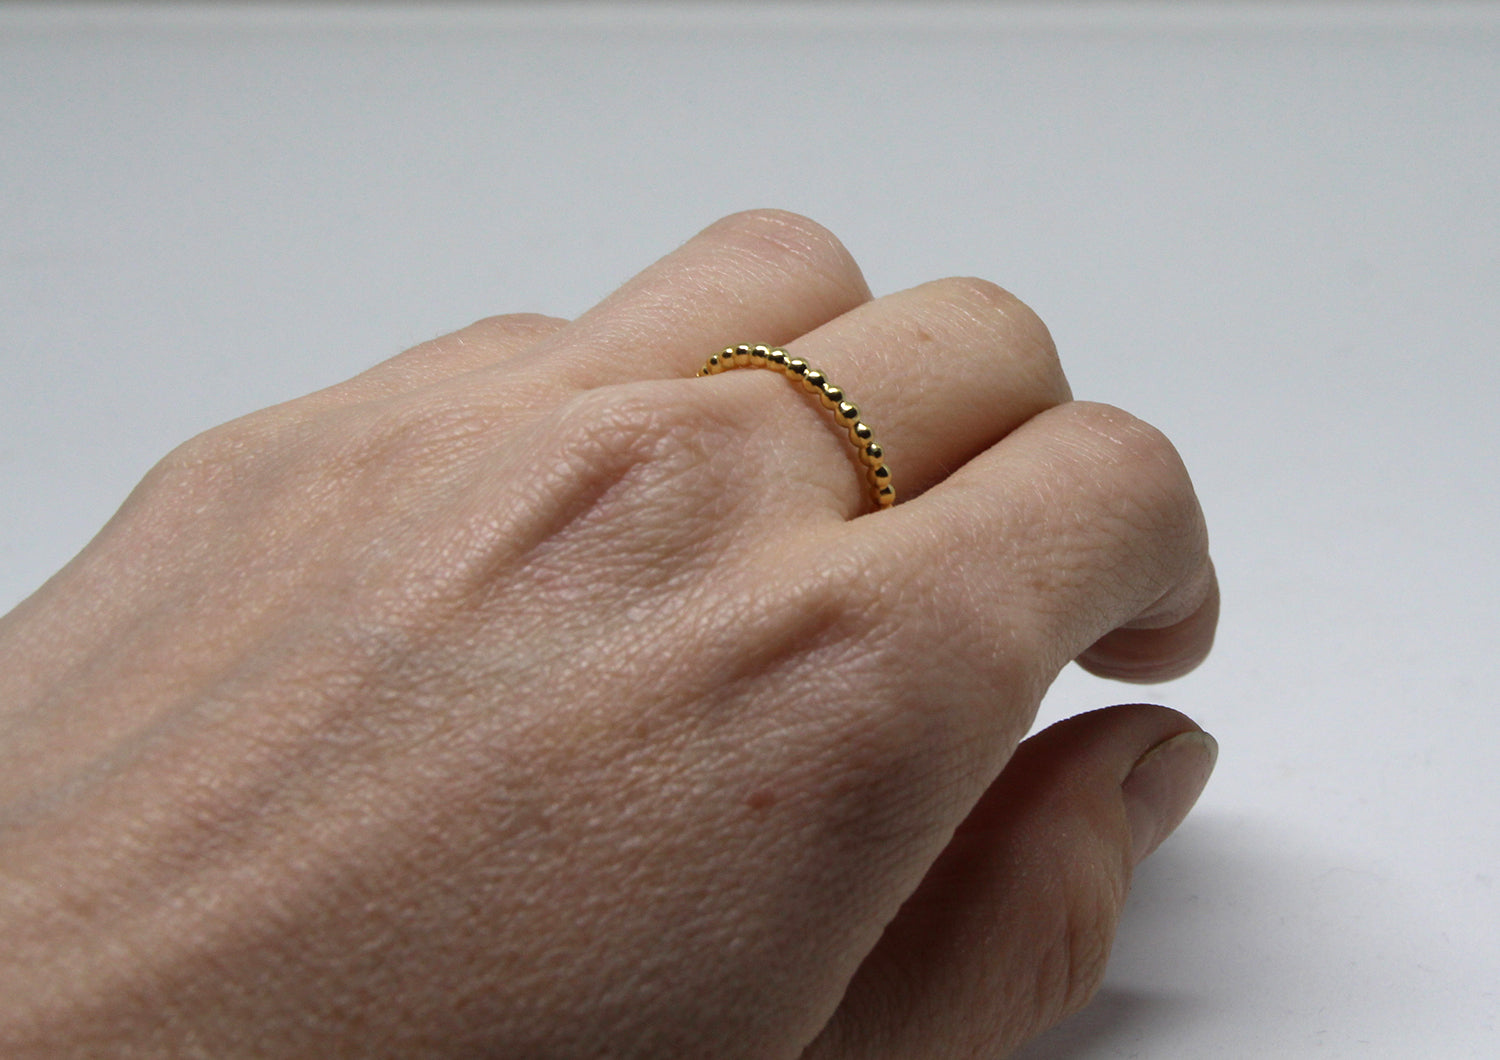 llayers jewelry Minimalist stacking vermeil ring with a beaded wire bague fine à empiler perlée en vermeil or